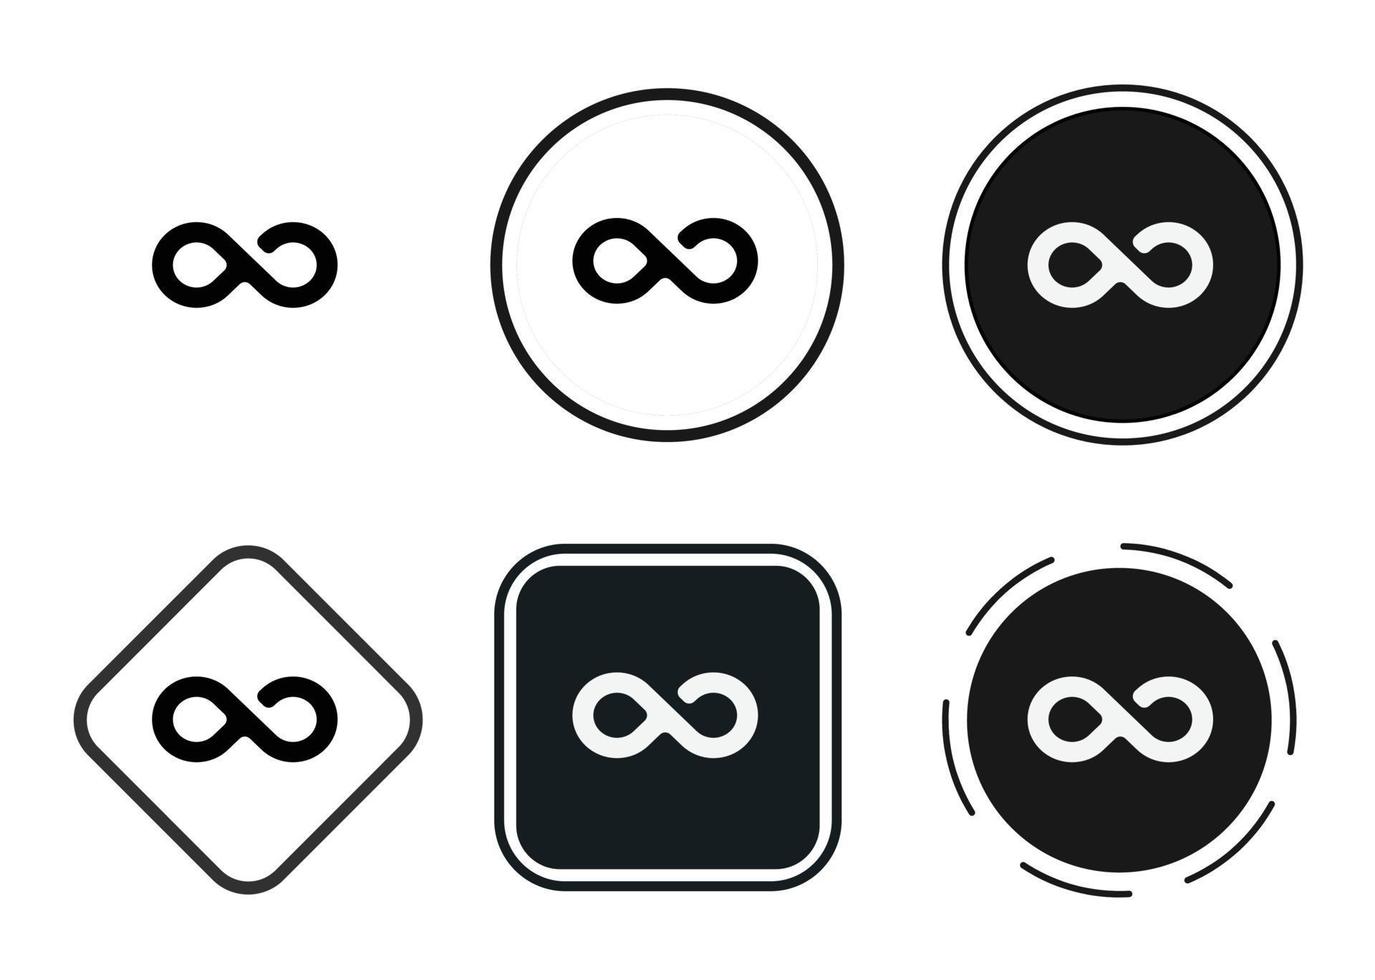 infinite icon . web icon set . icons collection flat. Simple vector illustration.